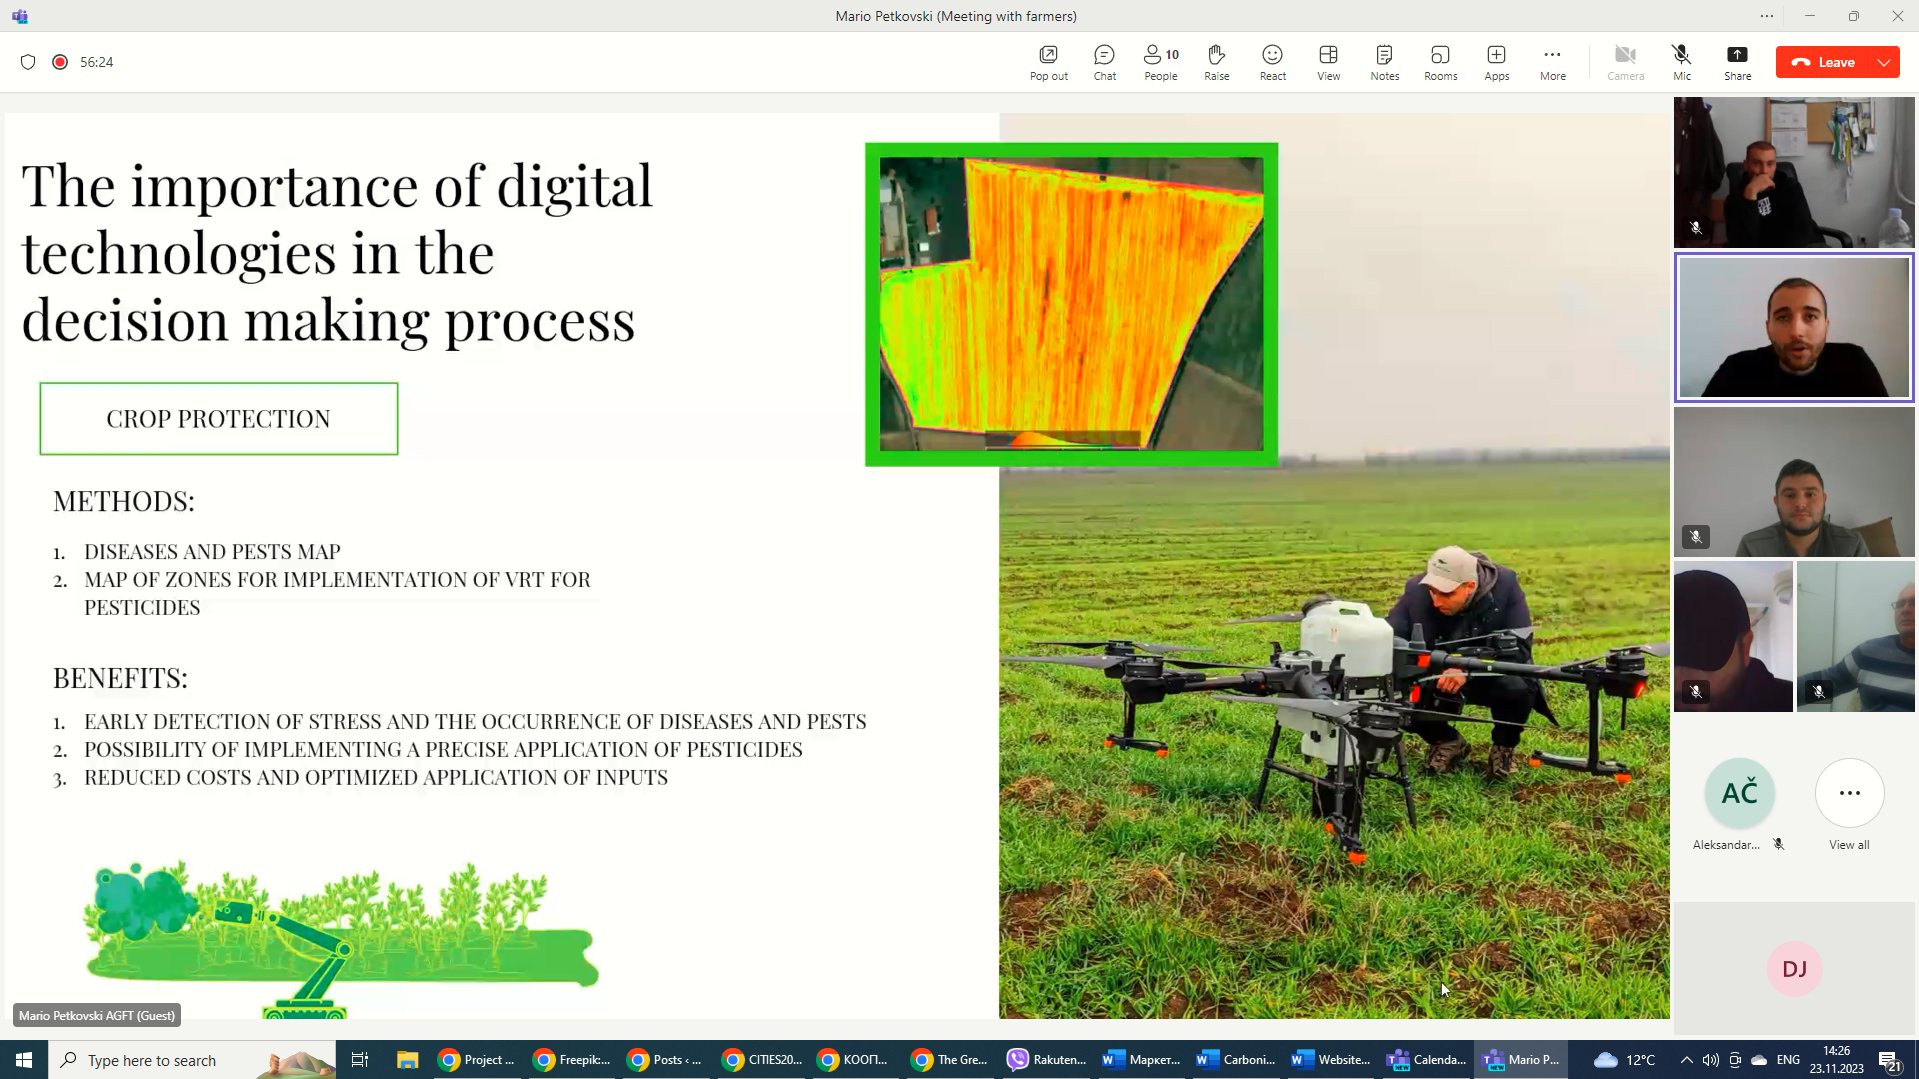 Milestone Achieved: Conducted Deliverable 2 in the Digitalization of farms in WB6 countries project